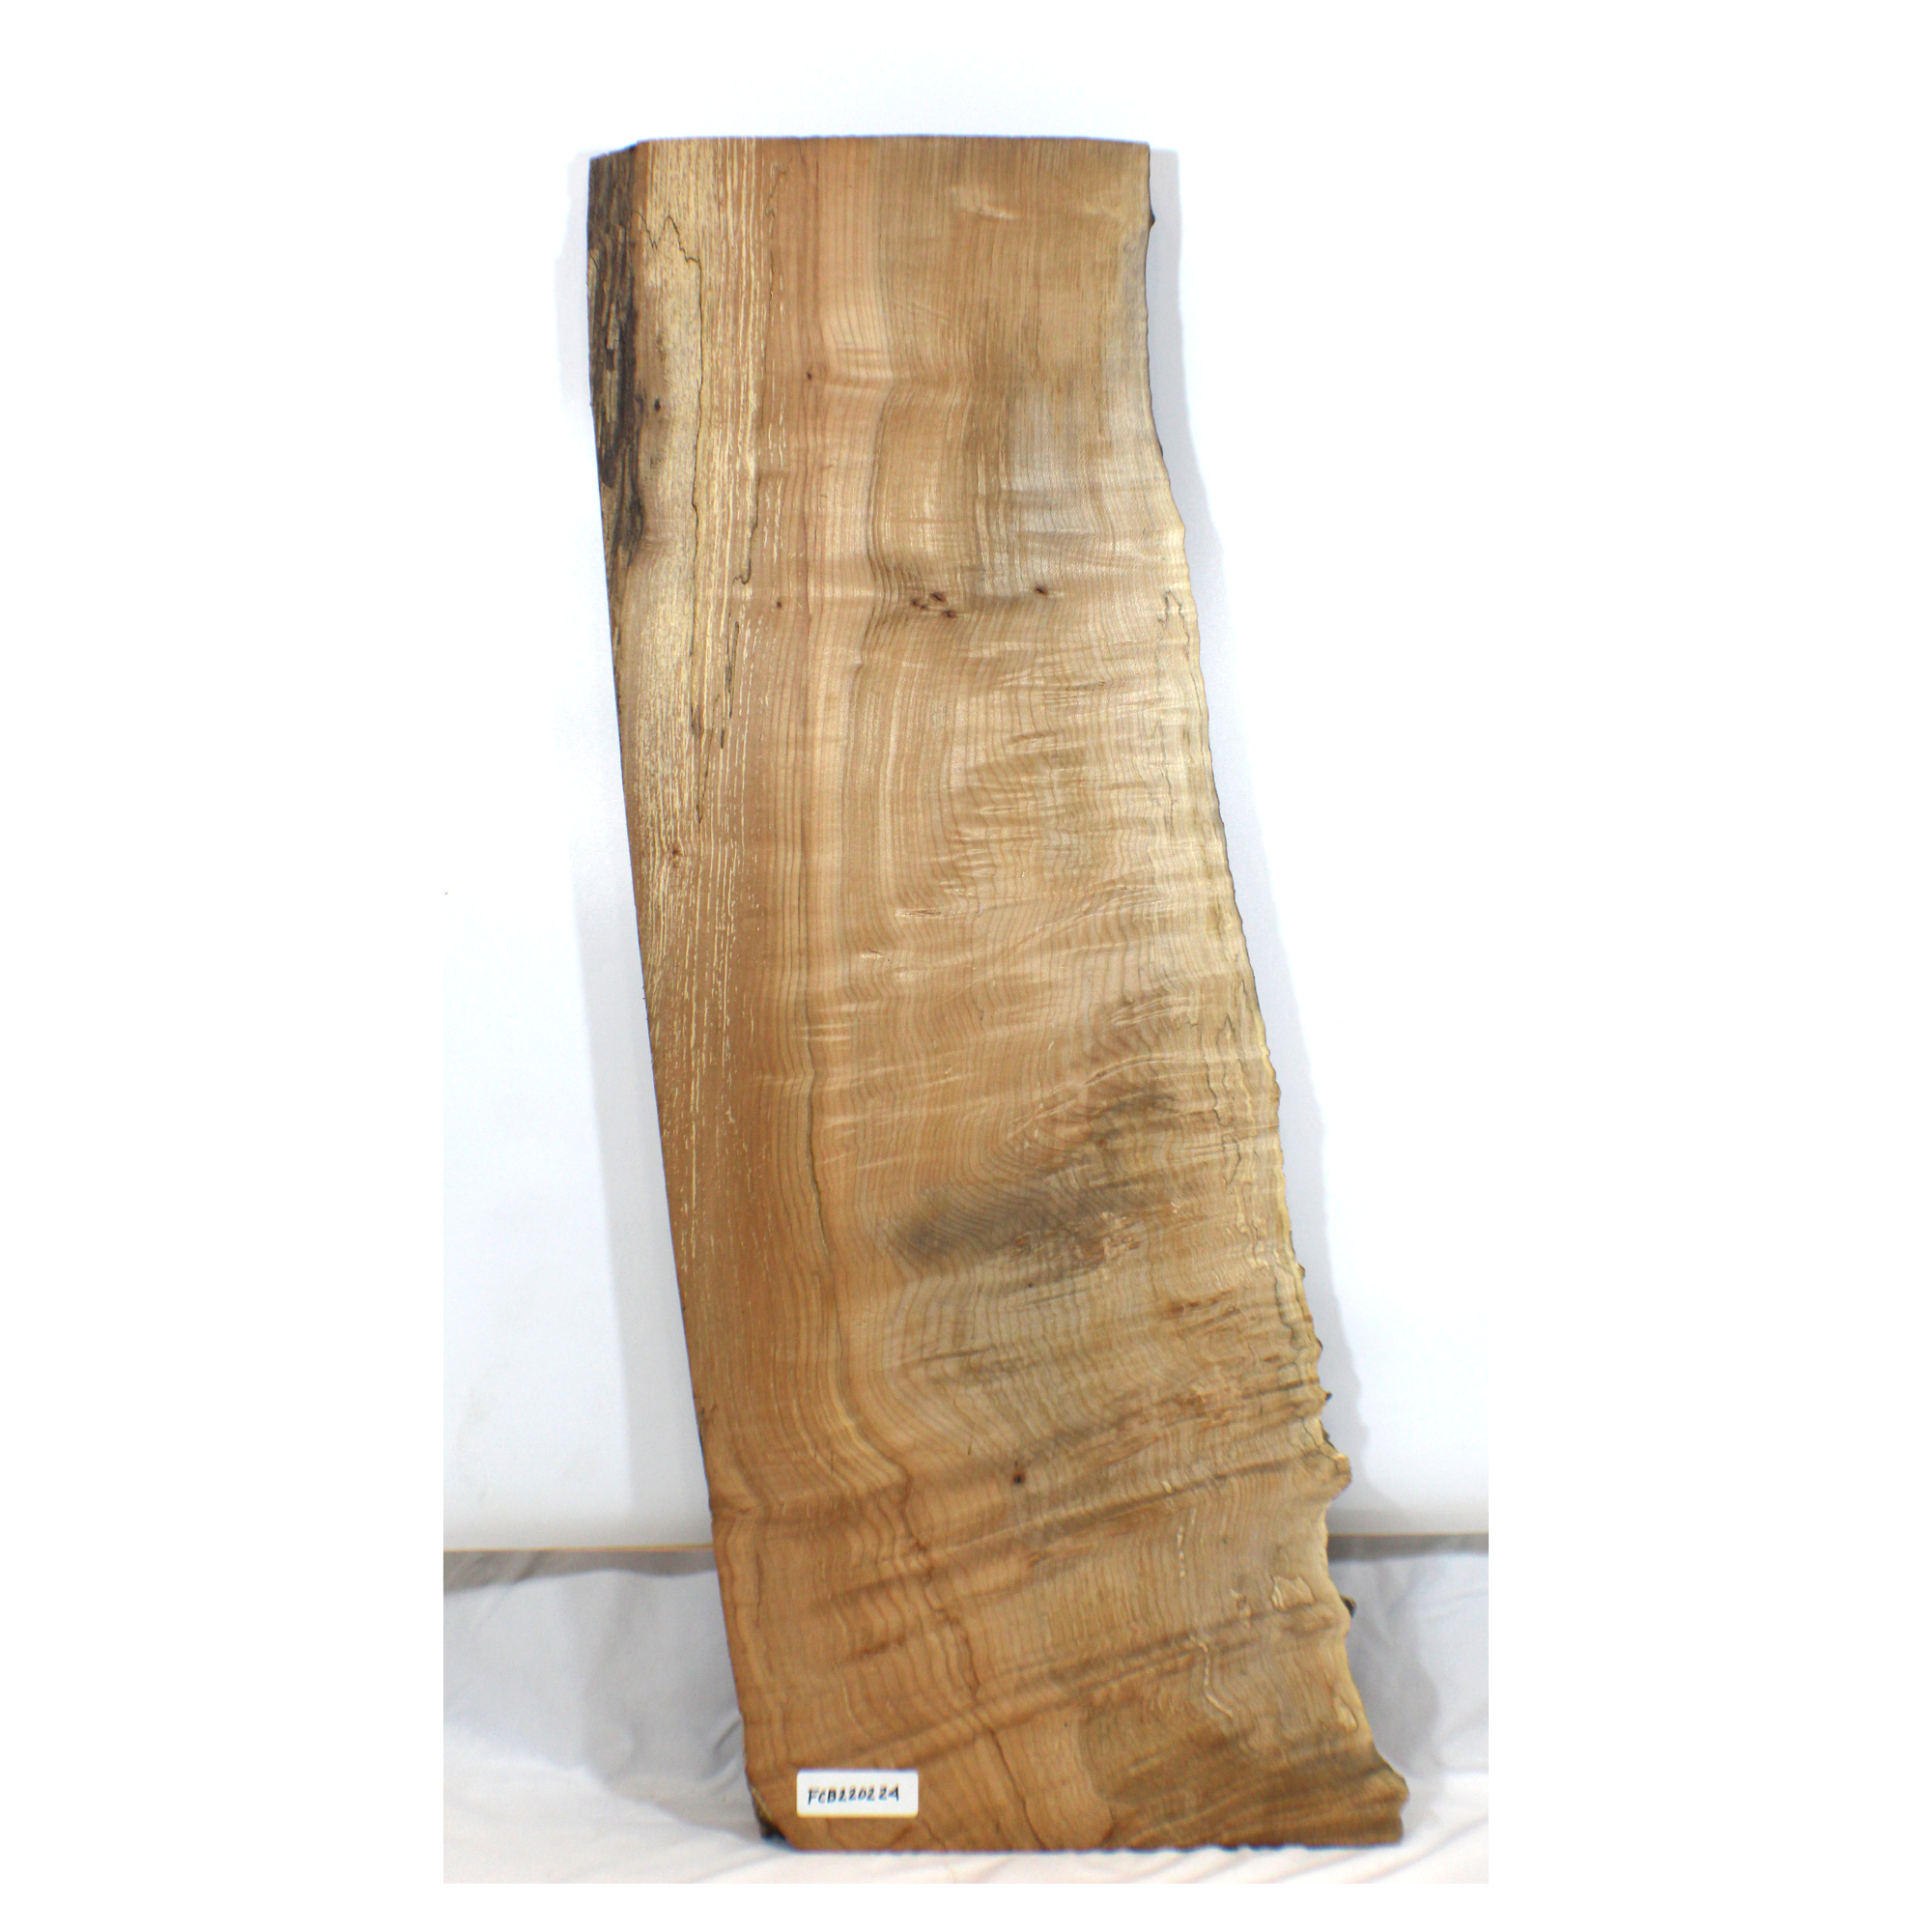 High curl flame maple craft board with light spalting, burl, two-tone color, and live edge. Dimensions: Thickness: 1